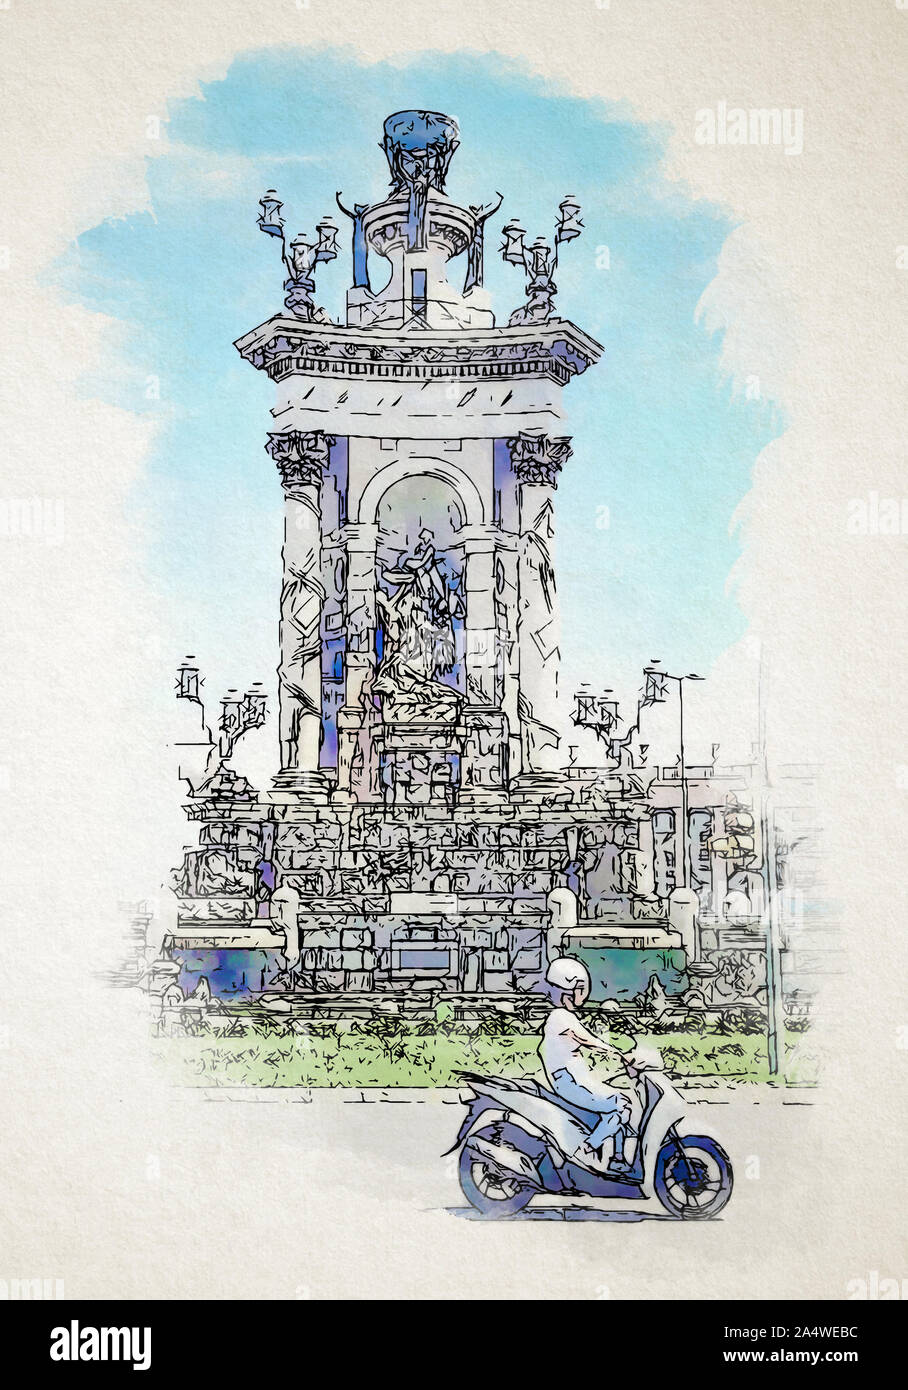 Artwork in painting style Barcelona, Spain. Plaza de Espana pen and watercolor illustration Stock Photo